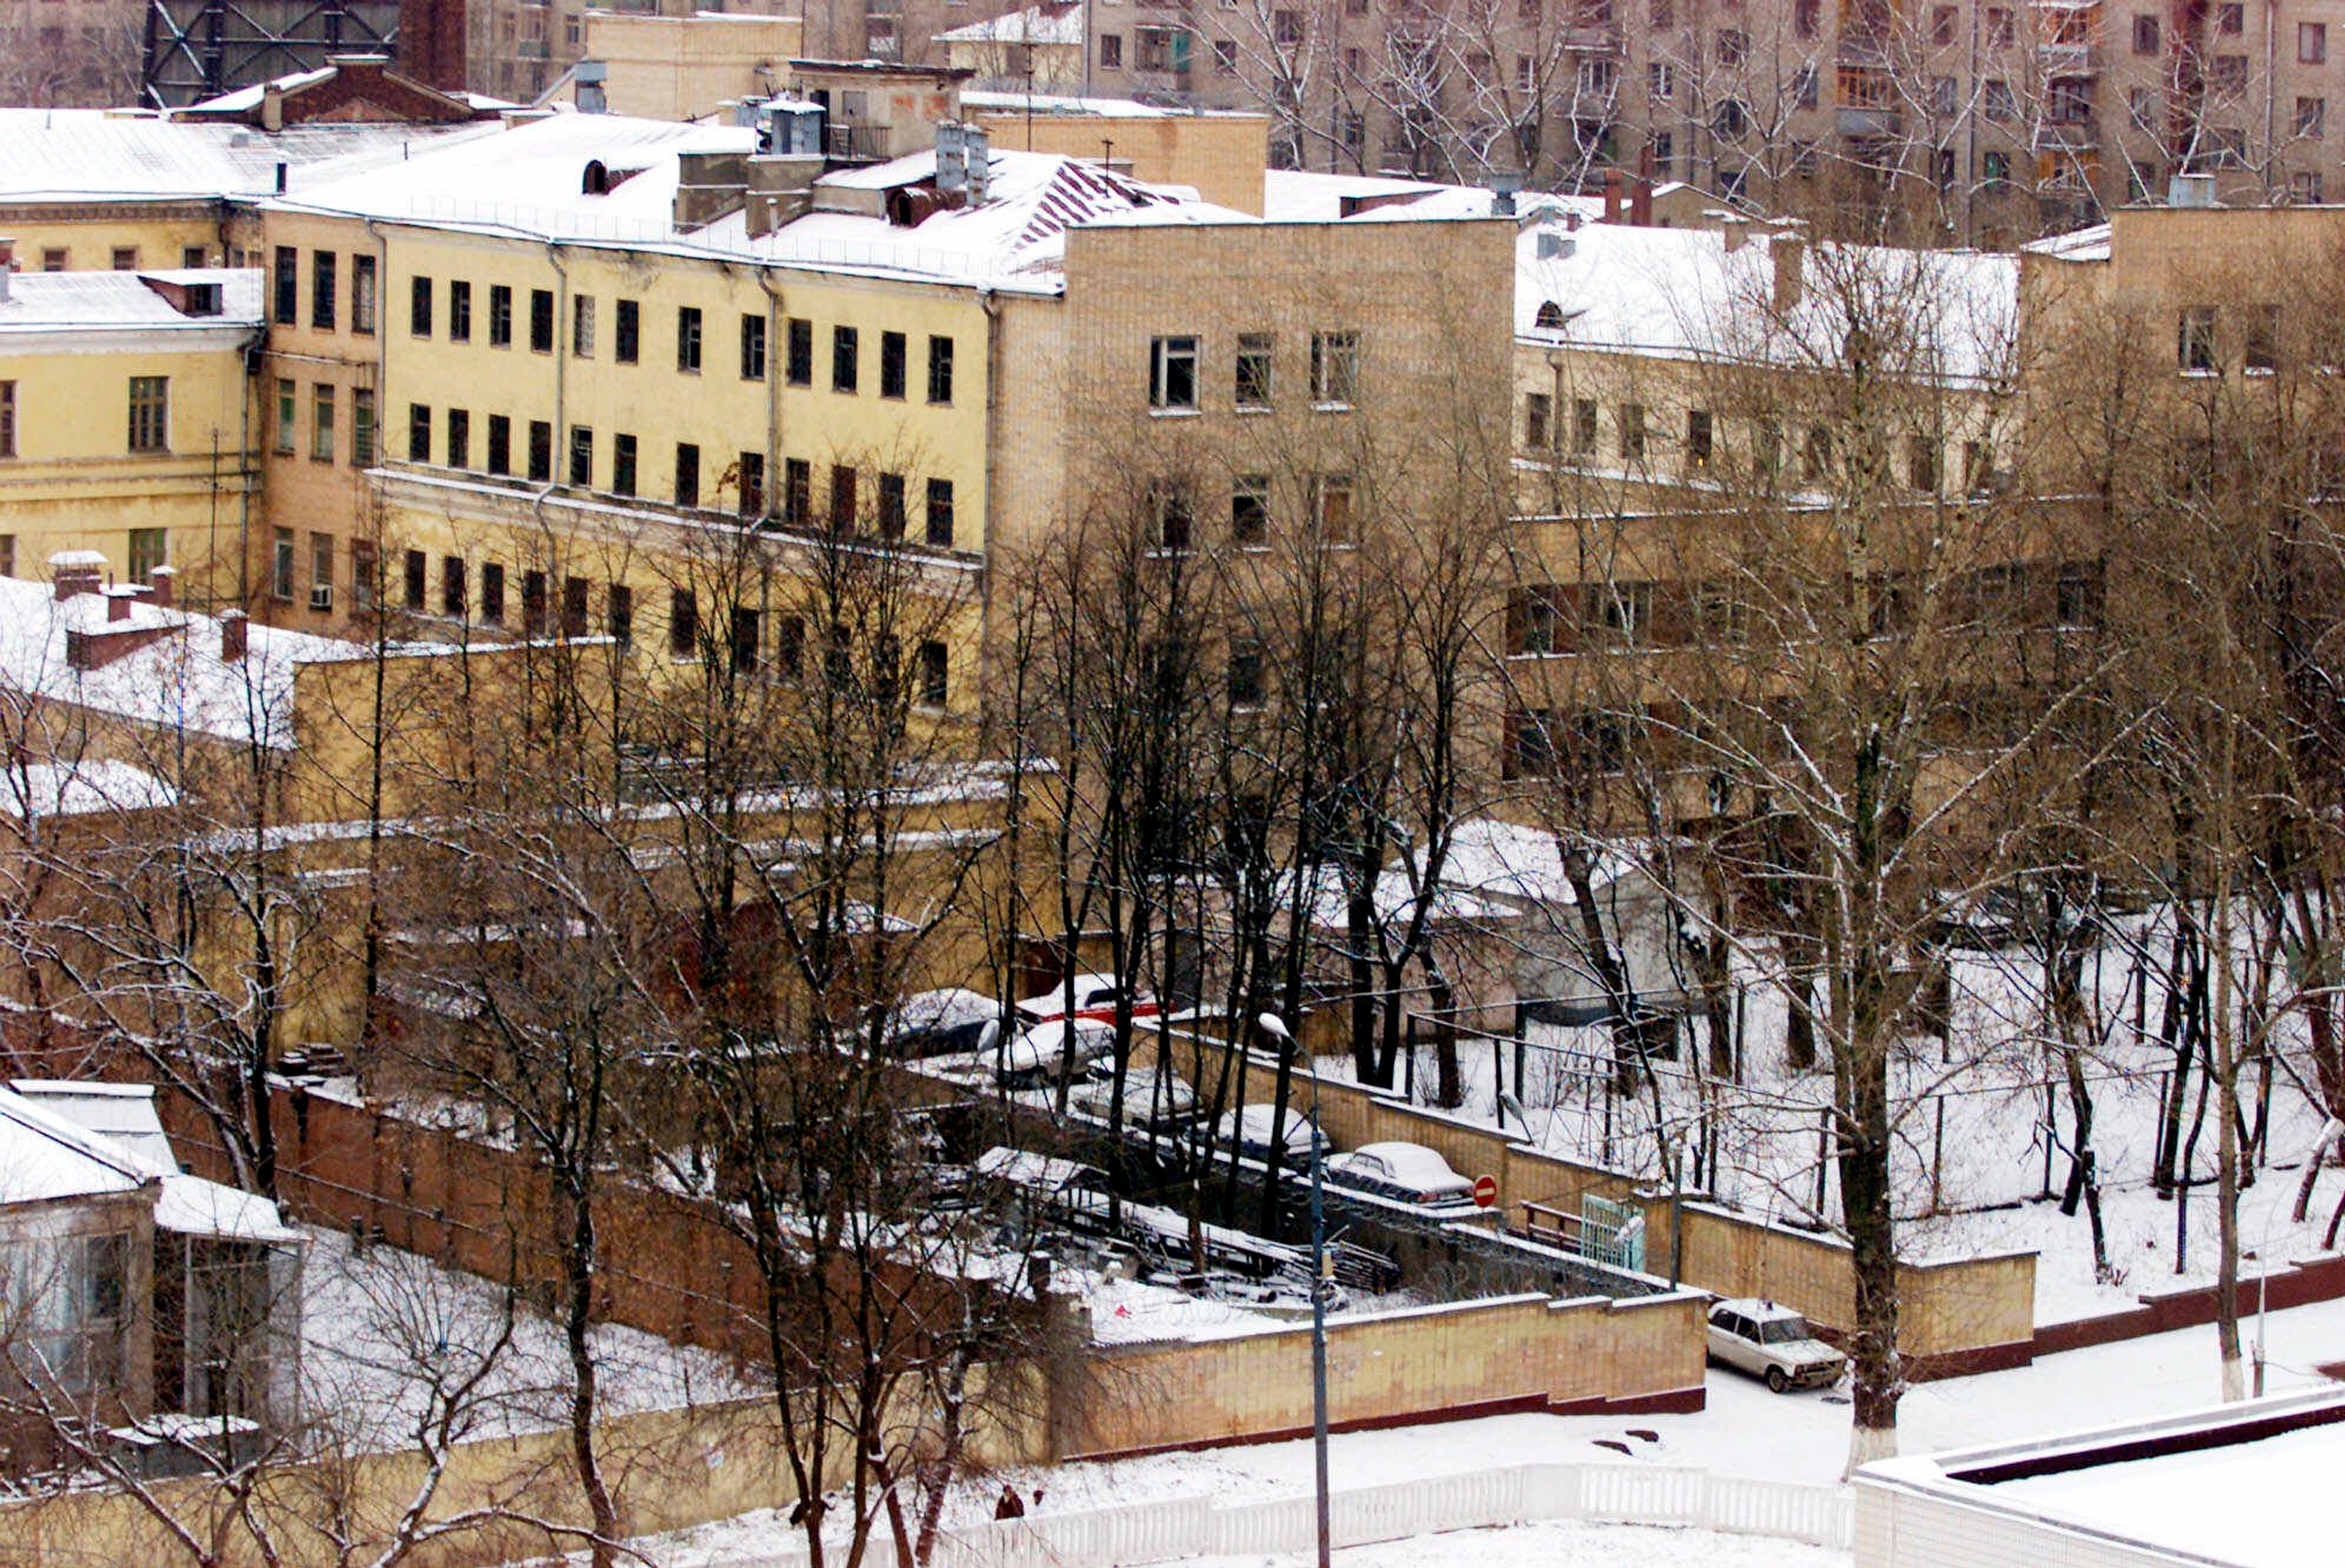 A general view of the pre-trial detention center "Lefortovo" in Moscow, on December 9, 2000.